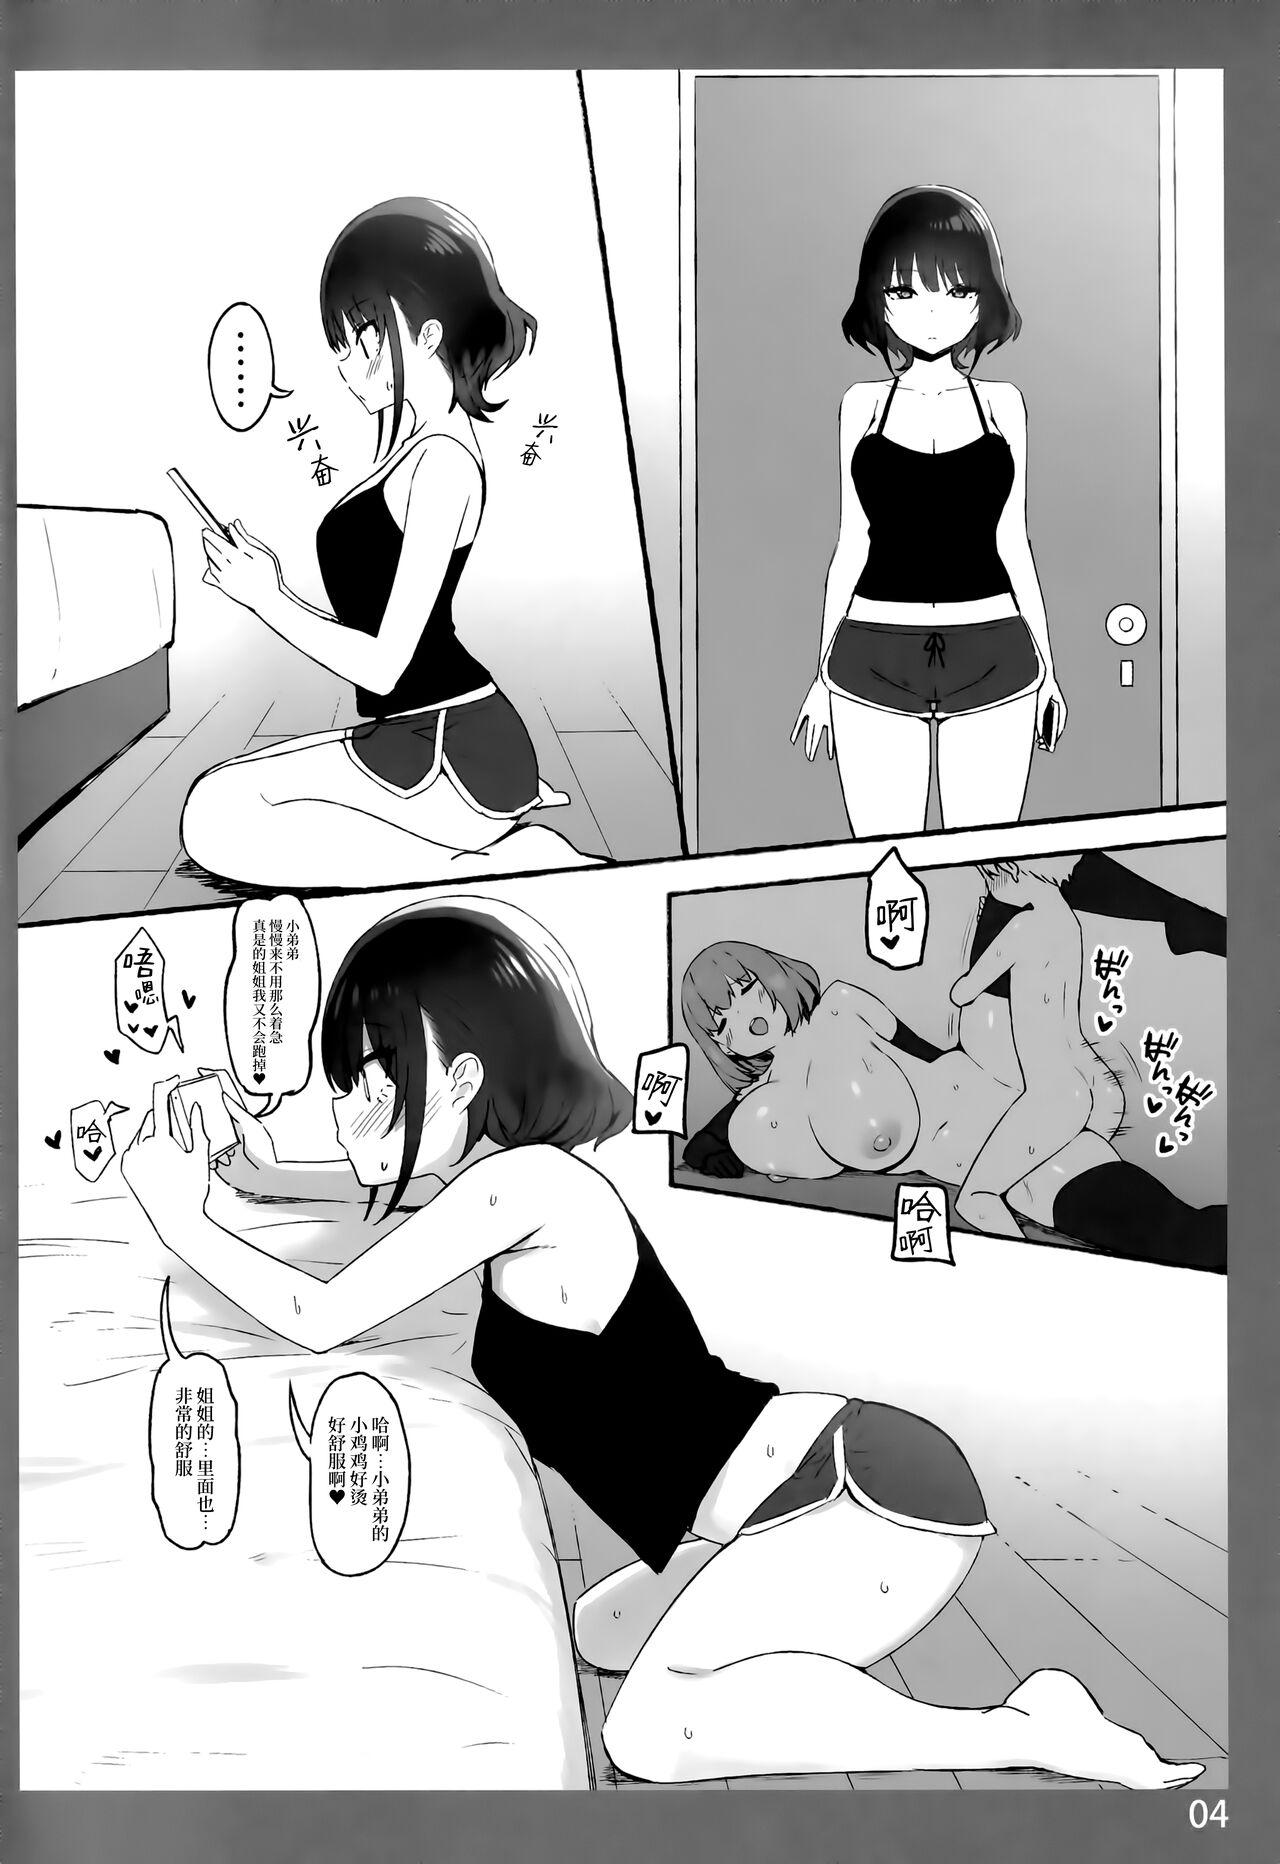 Tight Cunt [Candy Club (Sky)] Onee-chan to Torokeru Kimochi SP | The Melting Feeling with Onee-chan SP [Chinese] [白杨汉化组] - Original Highheels - Page 3